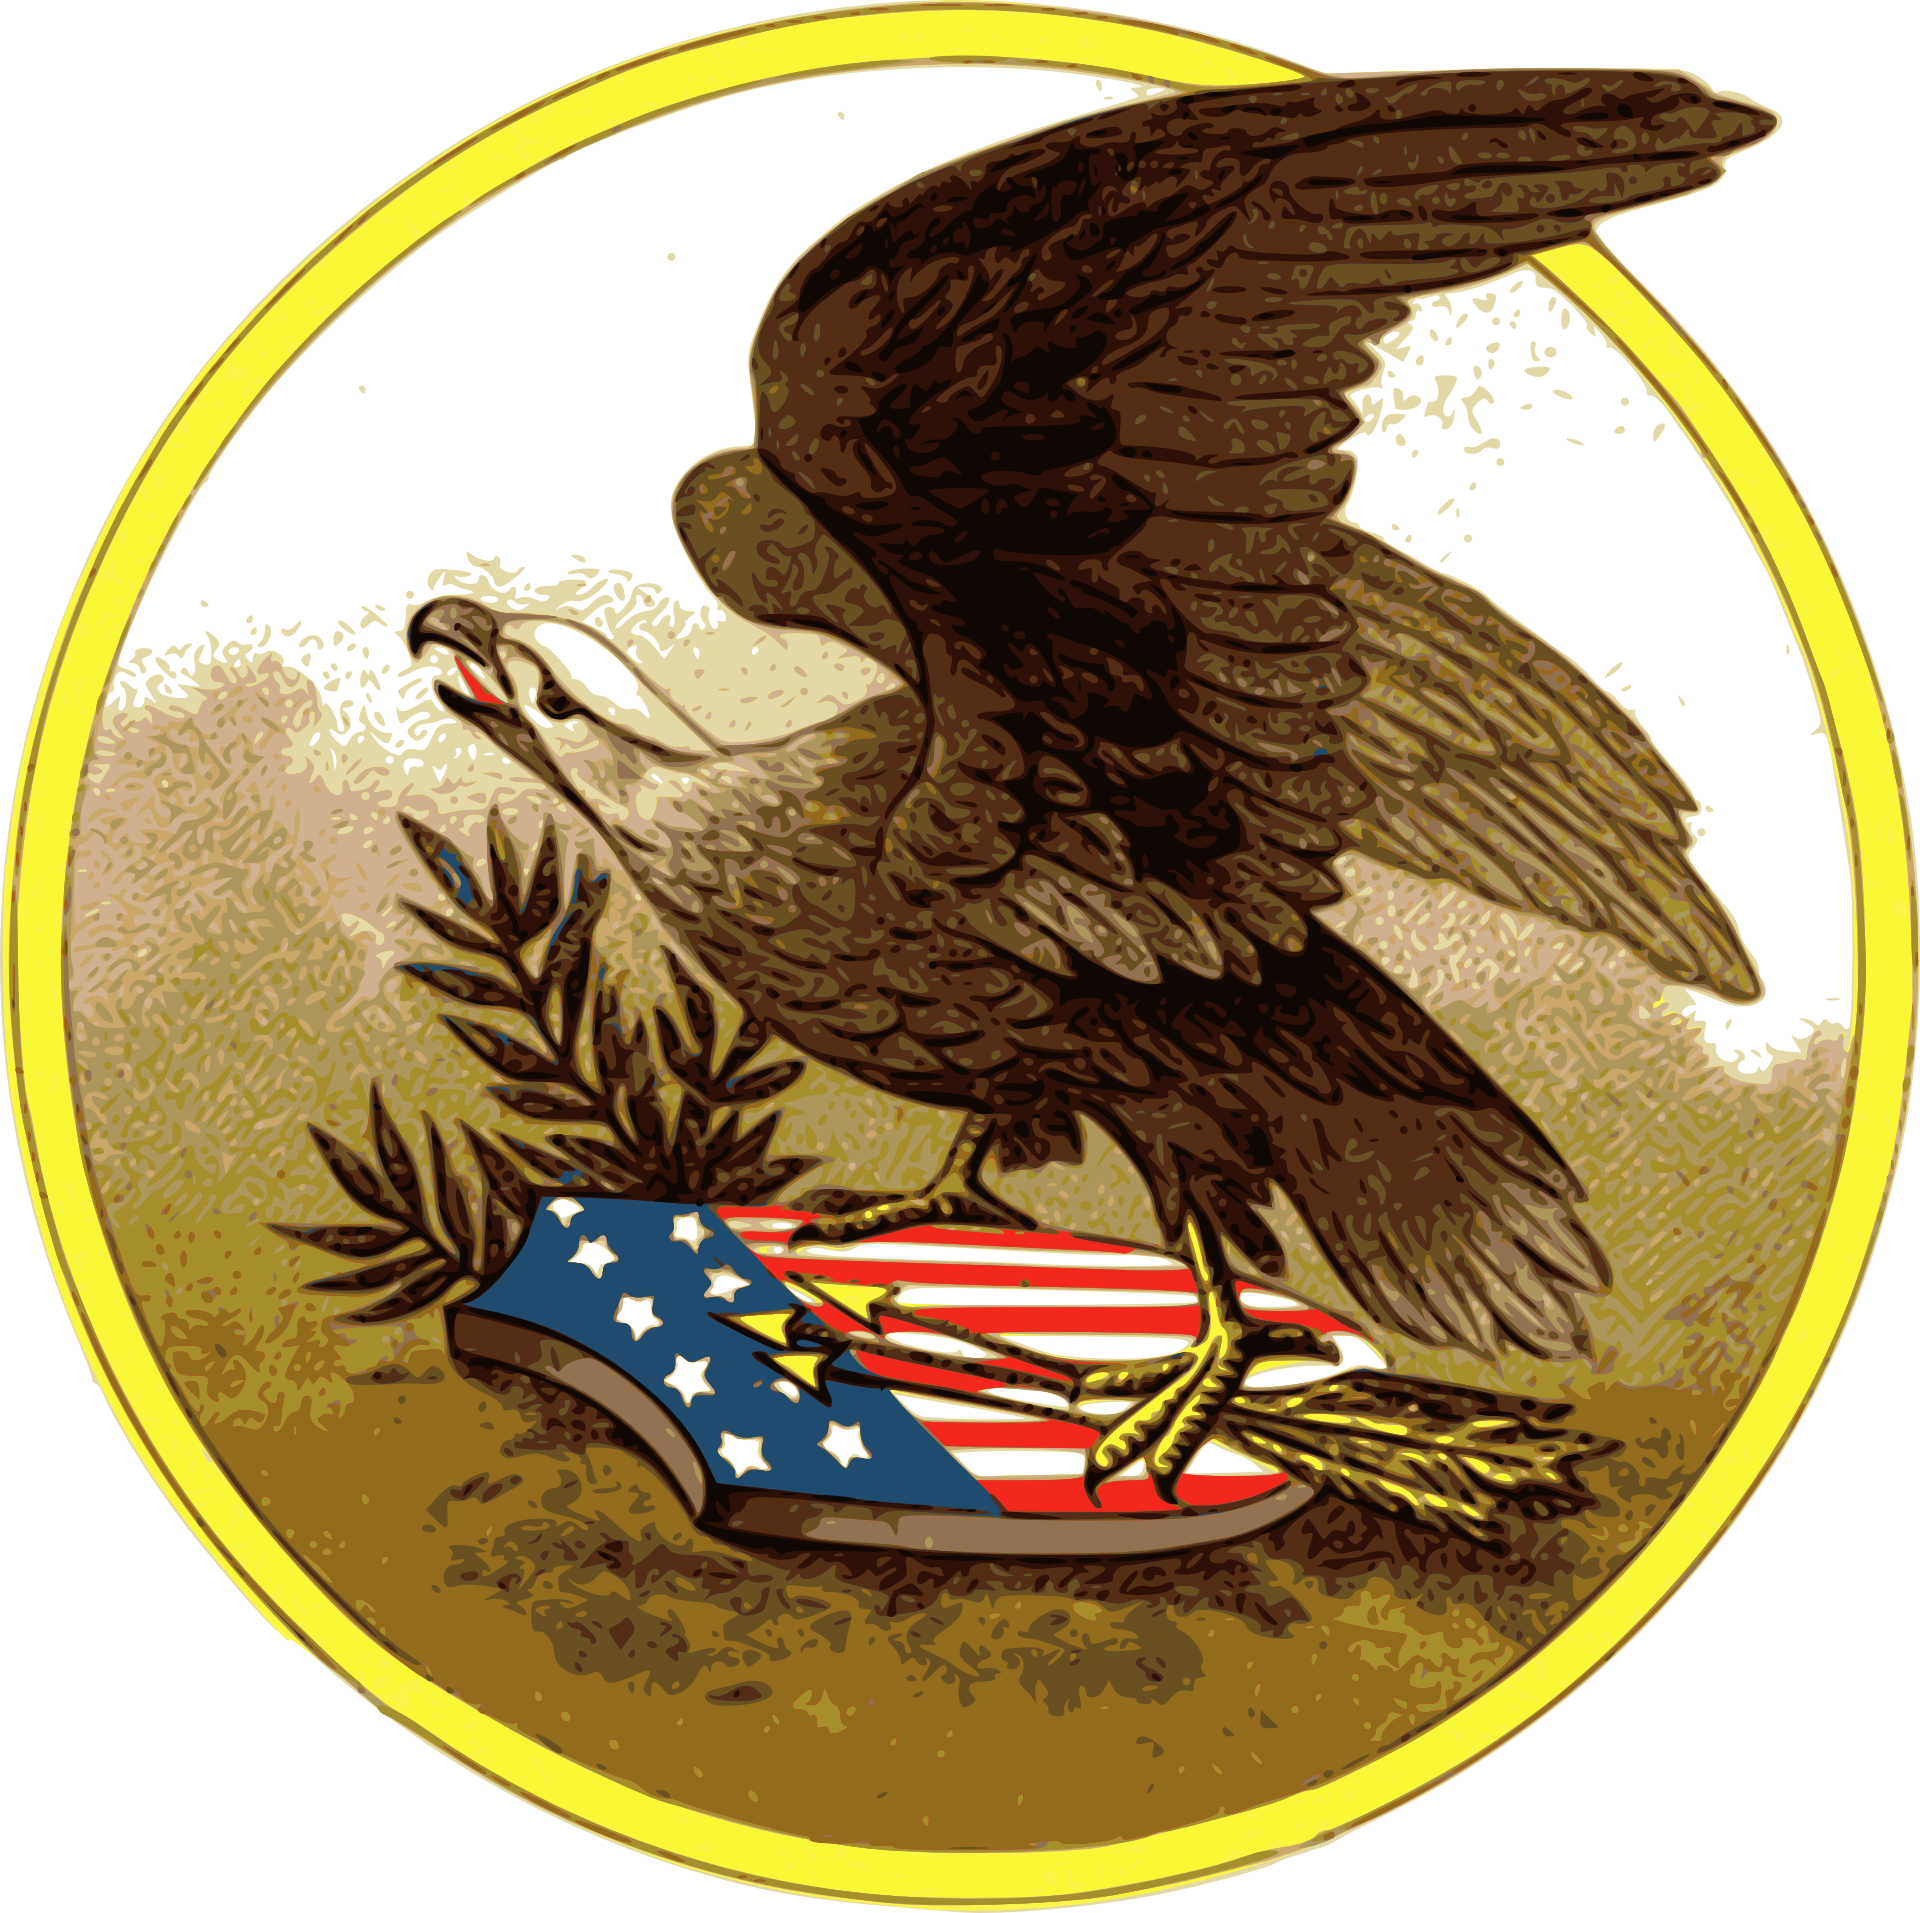     Free Clip Art  American Patriotic Eagles Clip Art For The 4th Of July